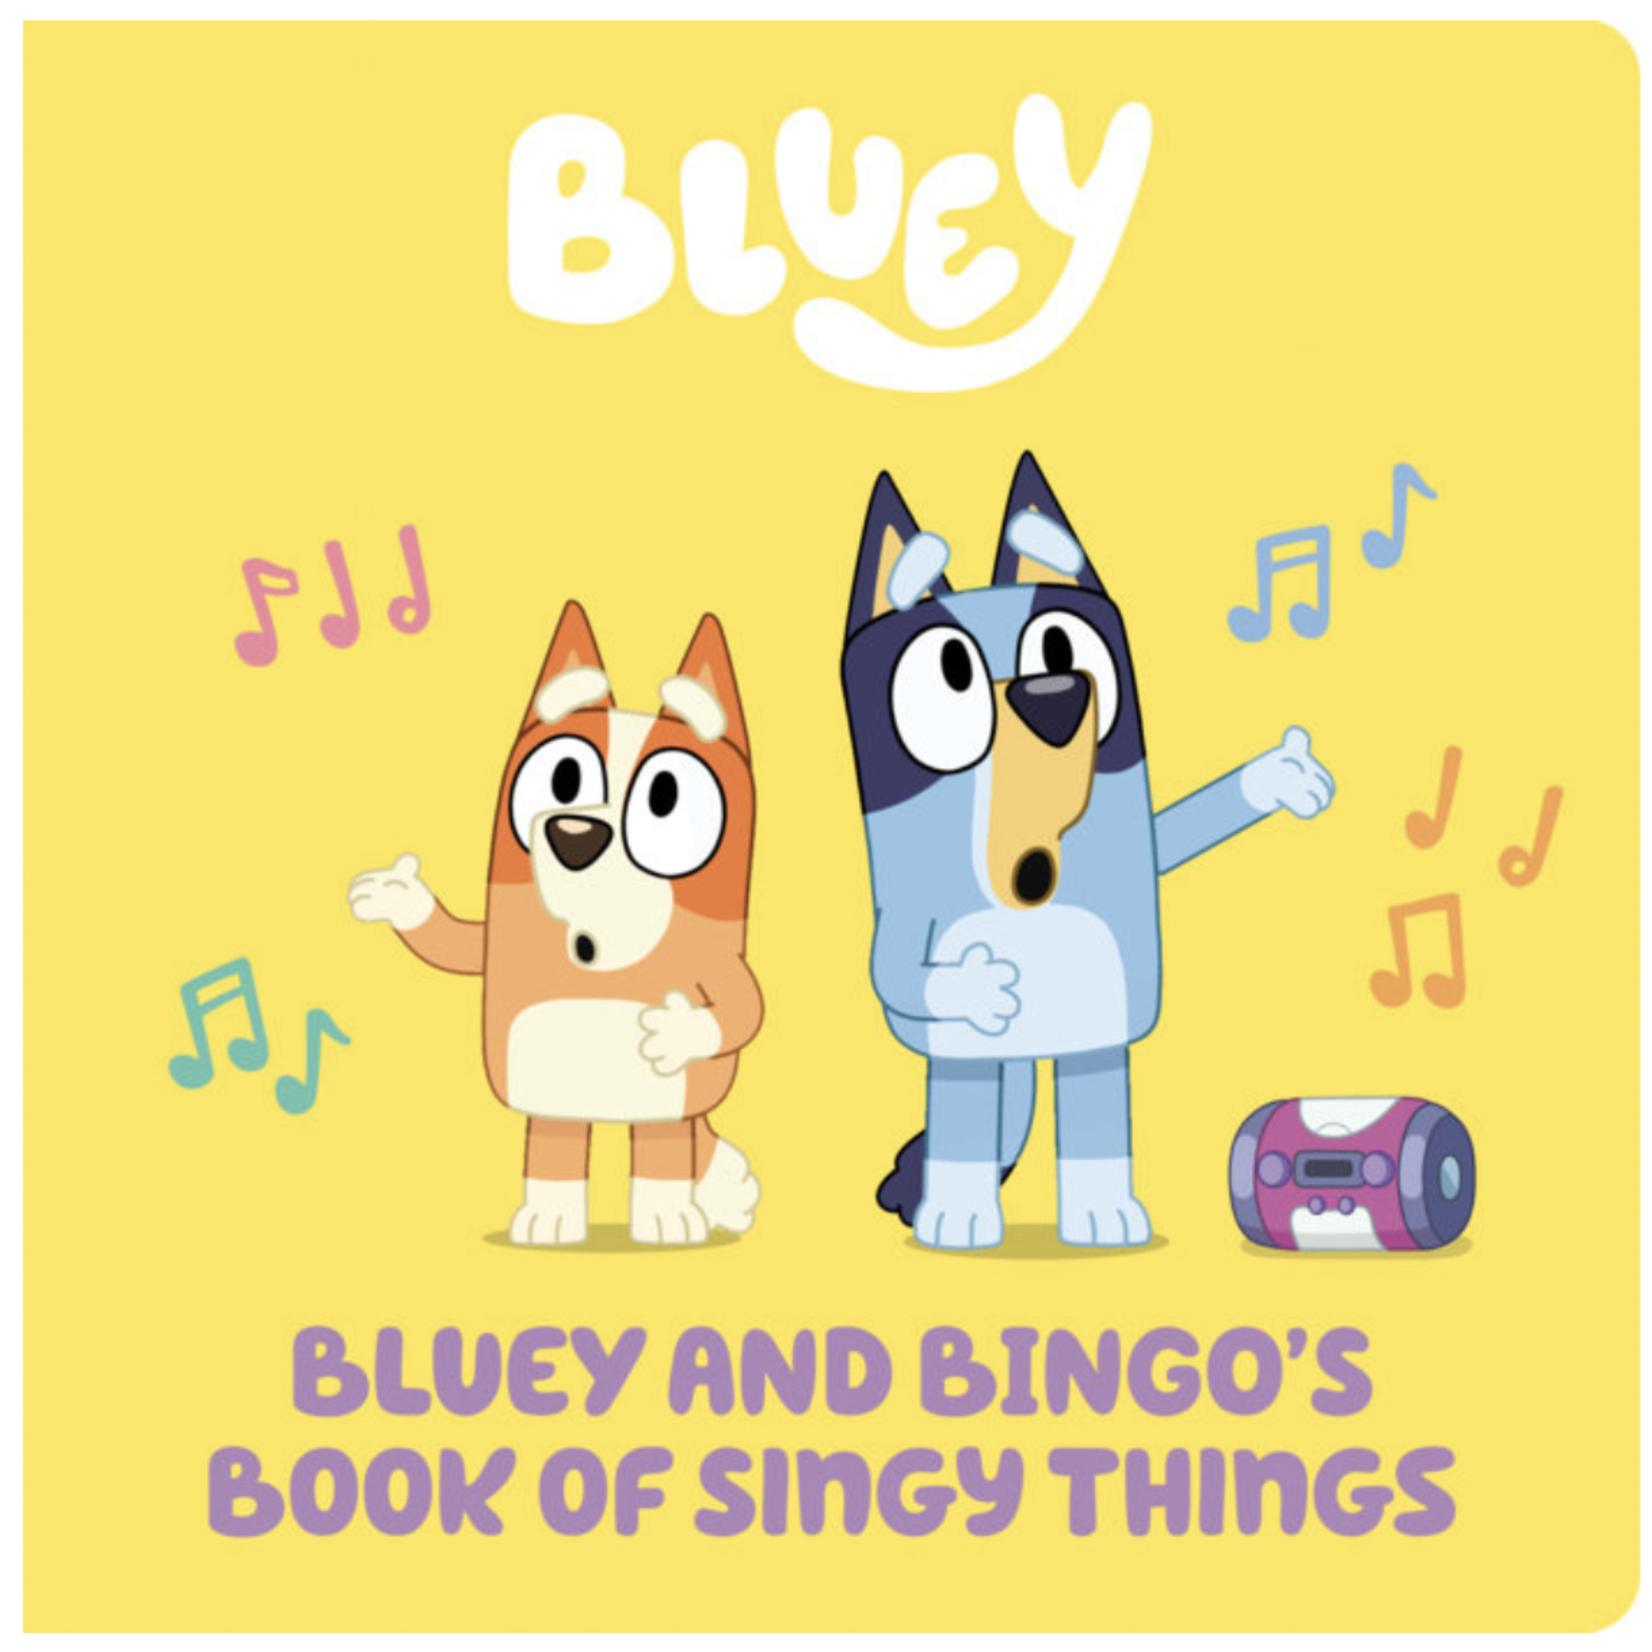 Penguin Random House Bluey and Bingo's Book of Singy Things